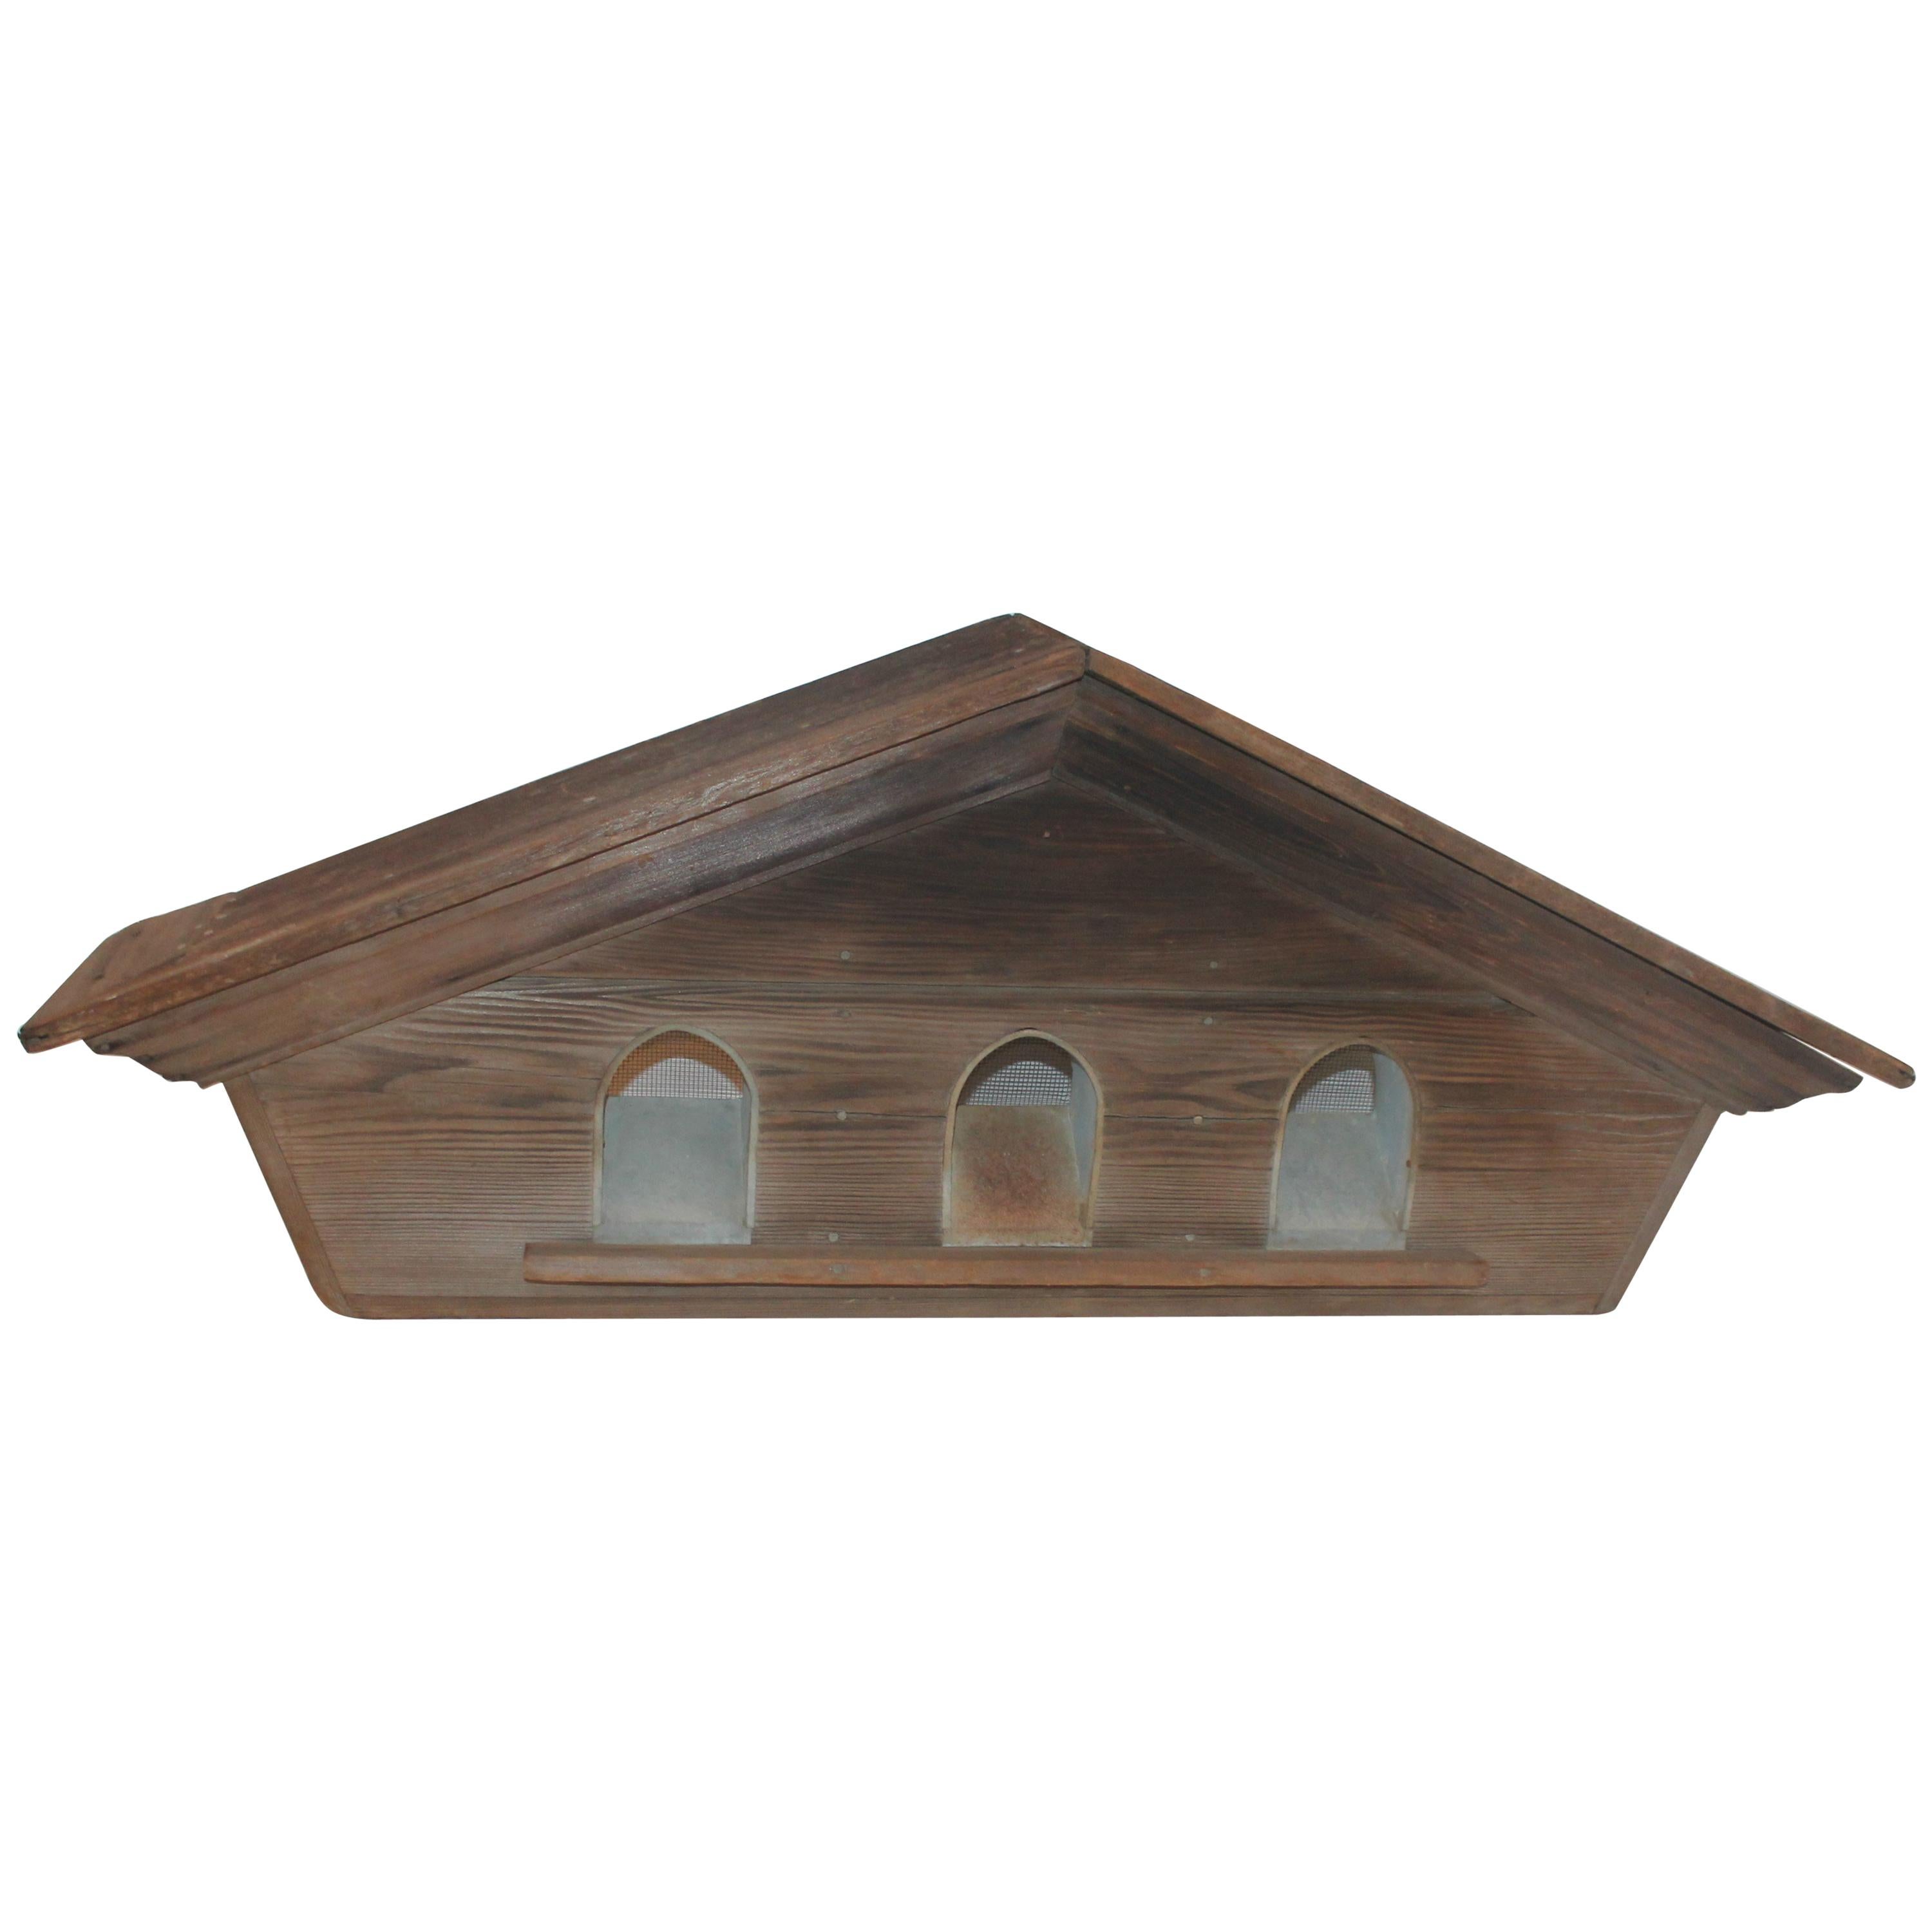 Architectural Cupola with Martin Bird House within from a Barn For Sale